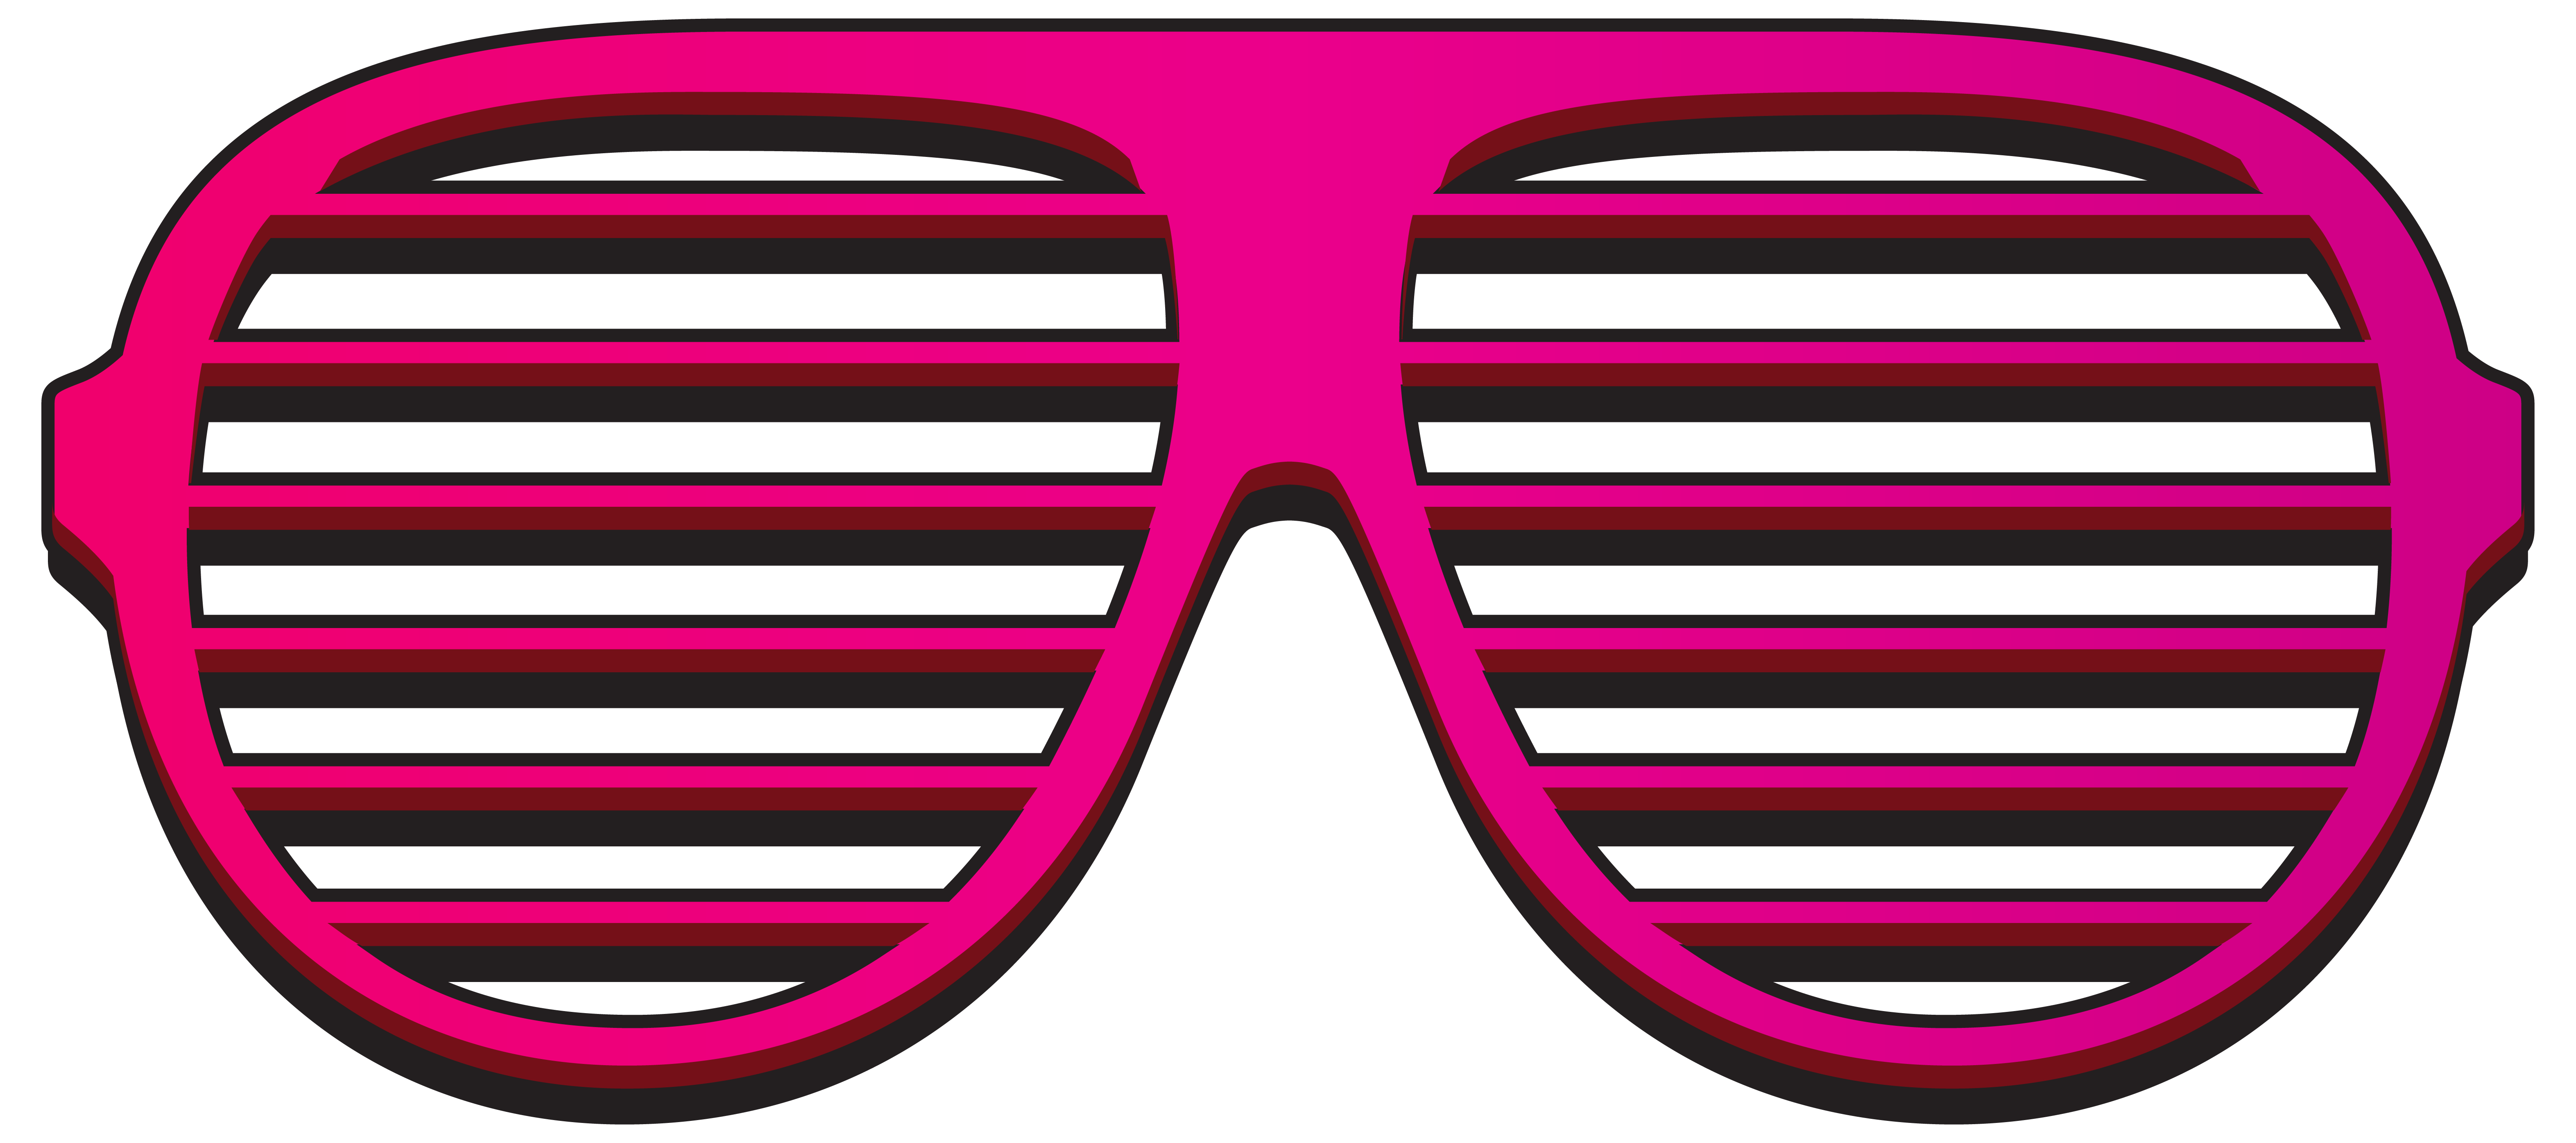 Shutter Shades Pink Sunglasses Download Free Image Clipart